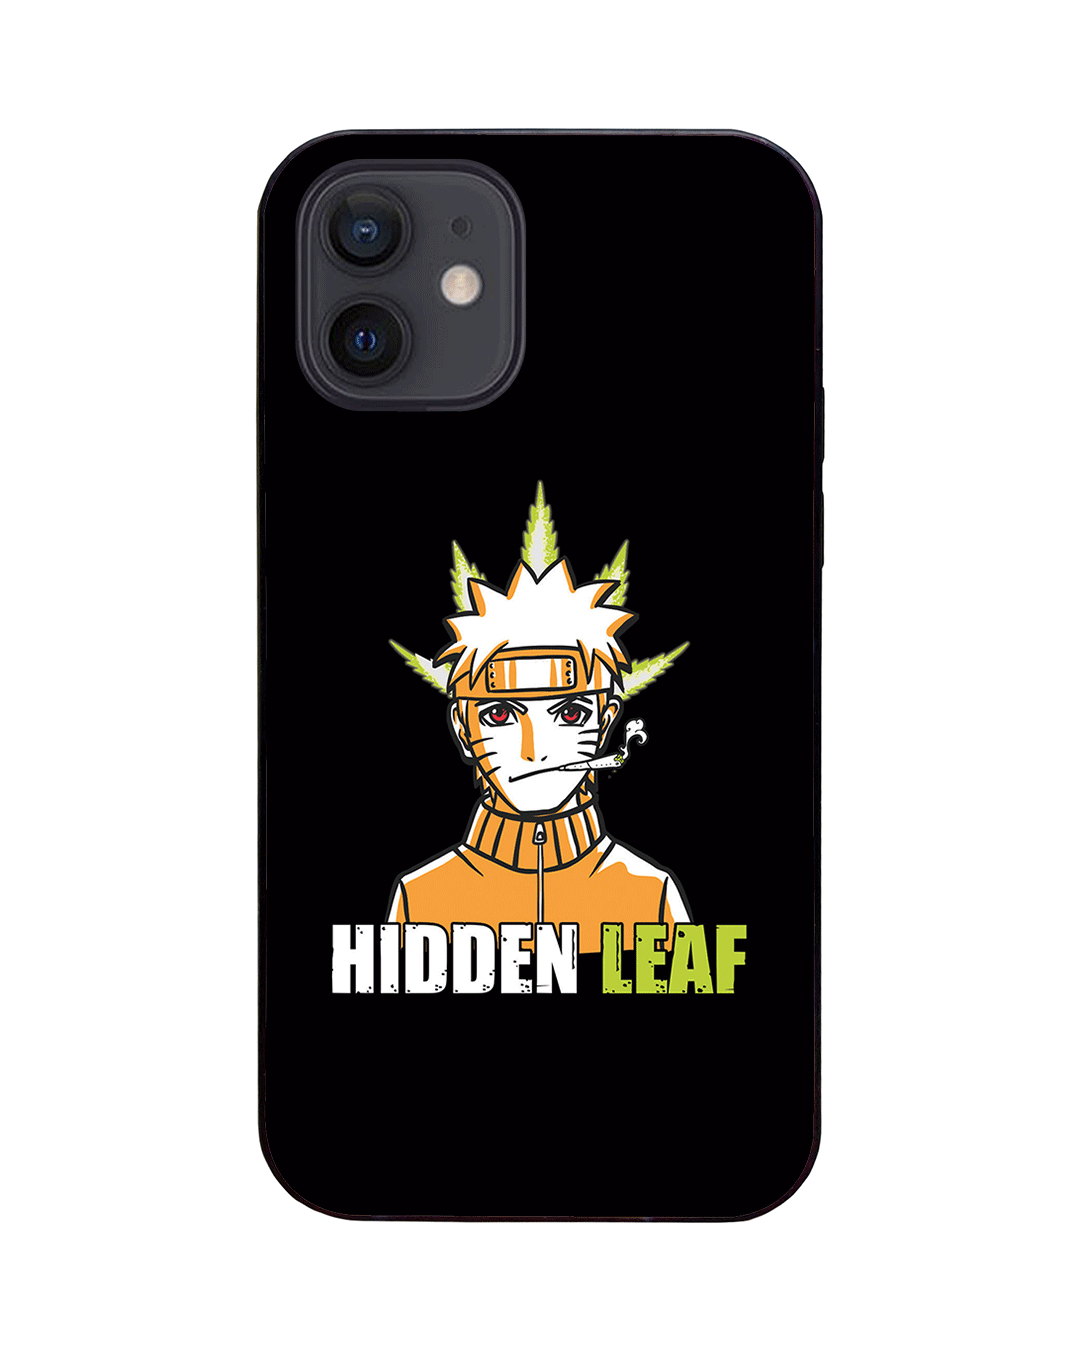 Buy Naruto Hidden Leaf LED Cover for iPhone 12 Pro Online in India at ...